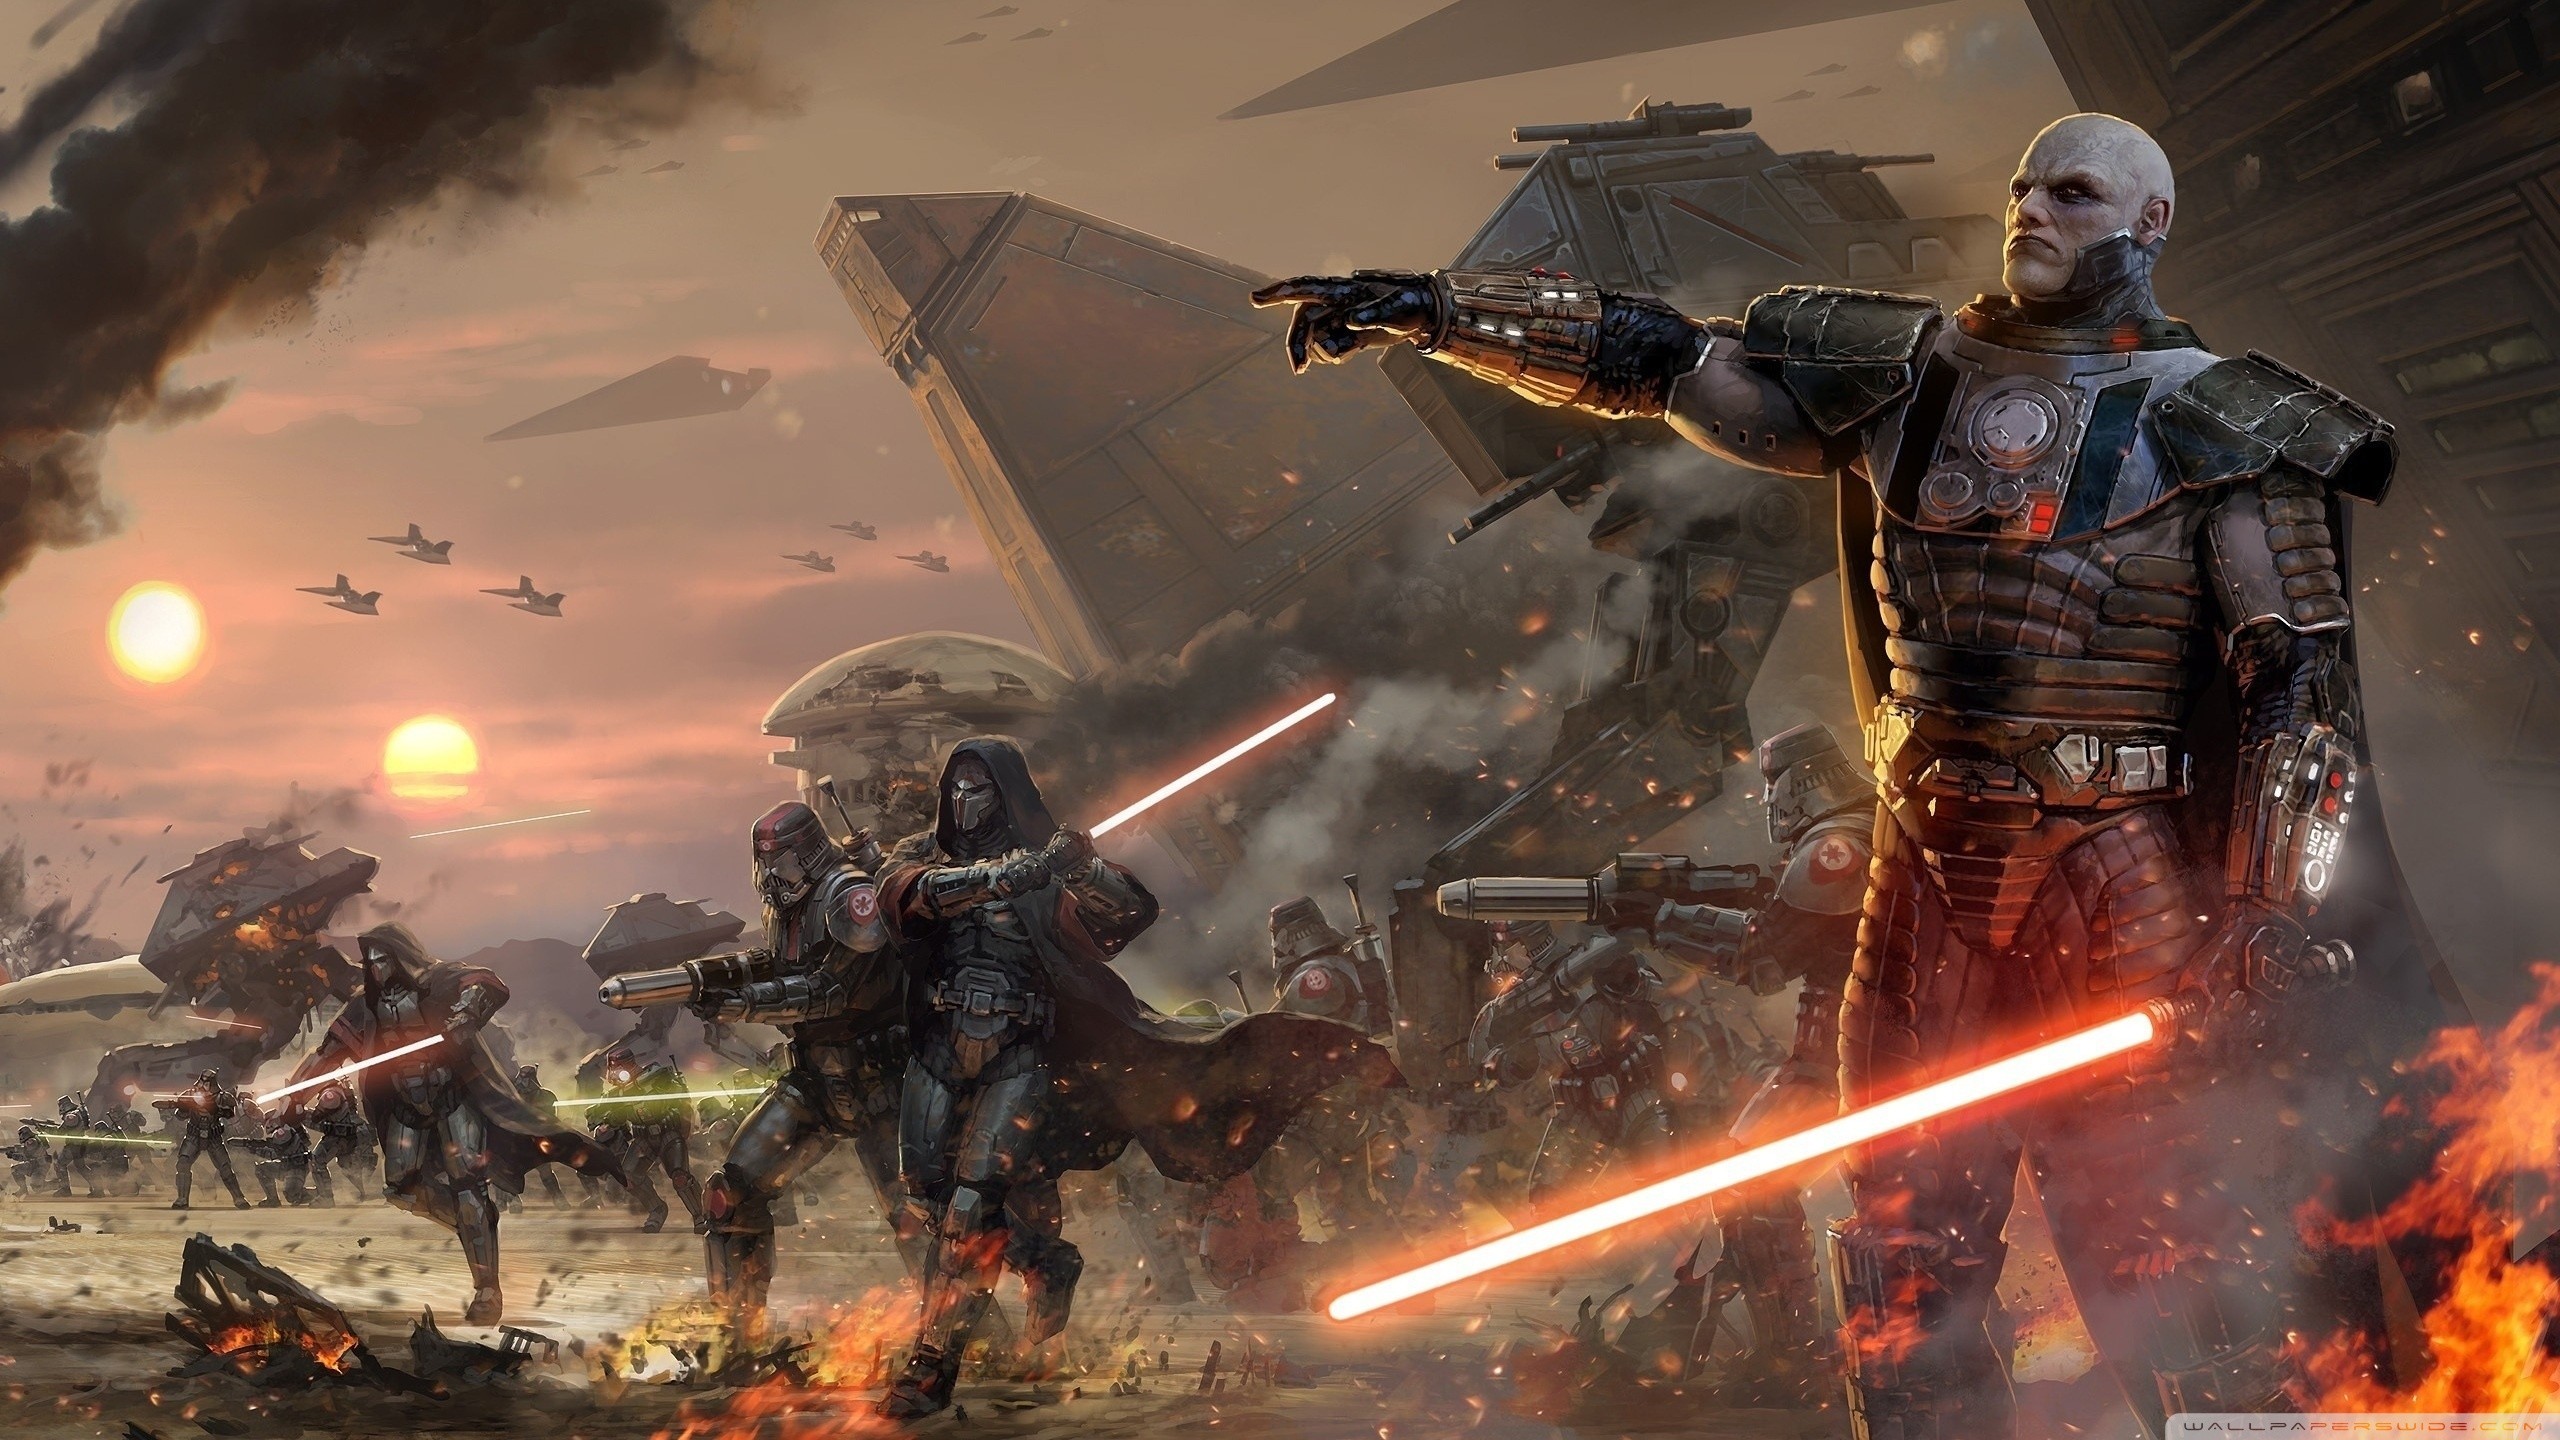 2560x1440 Res: 1920x1080, Images For > Swtor Wallpaper